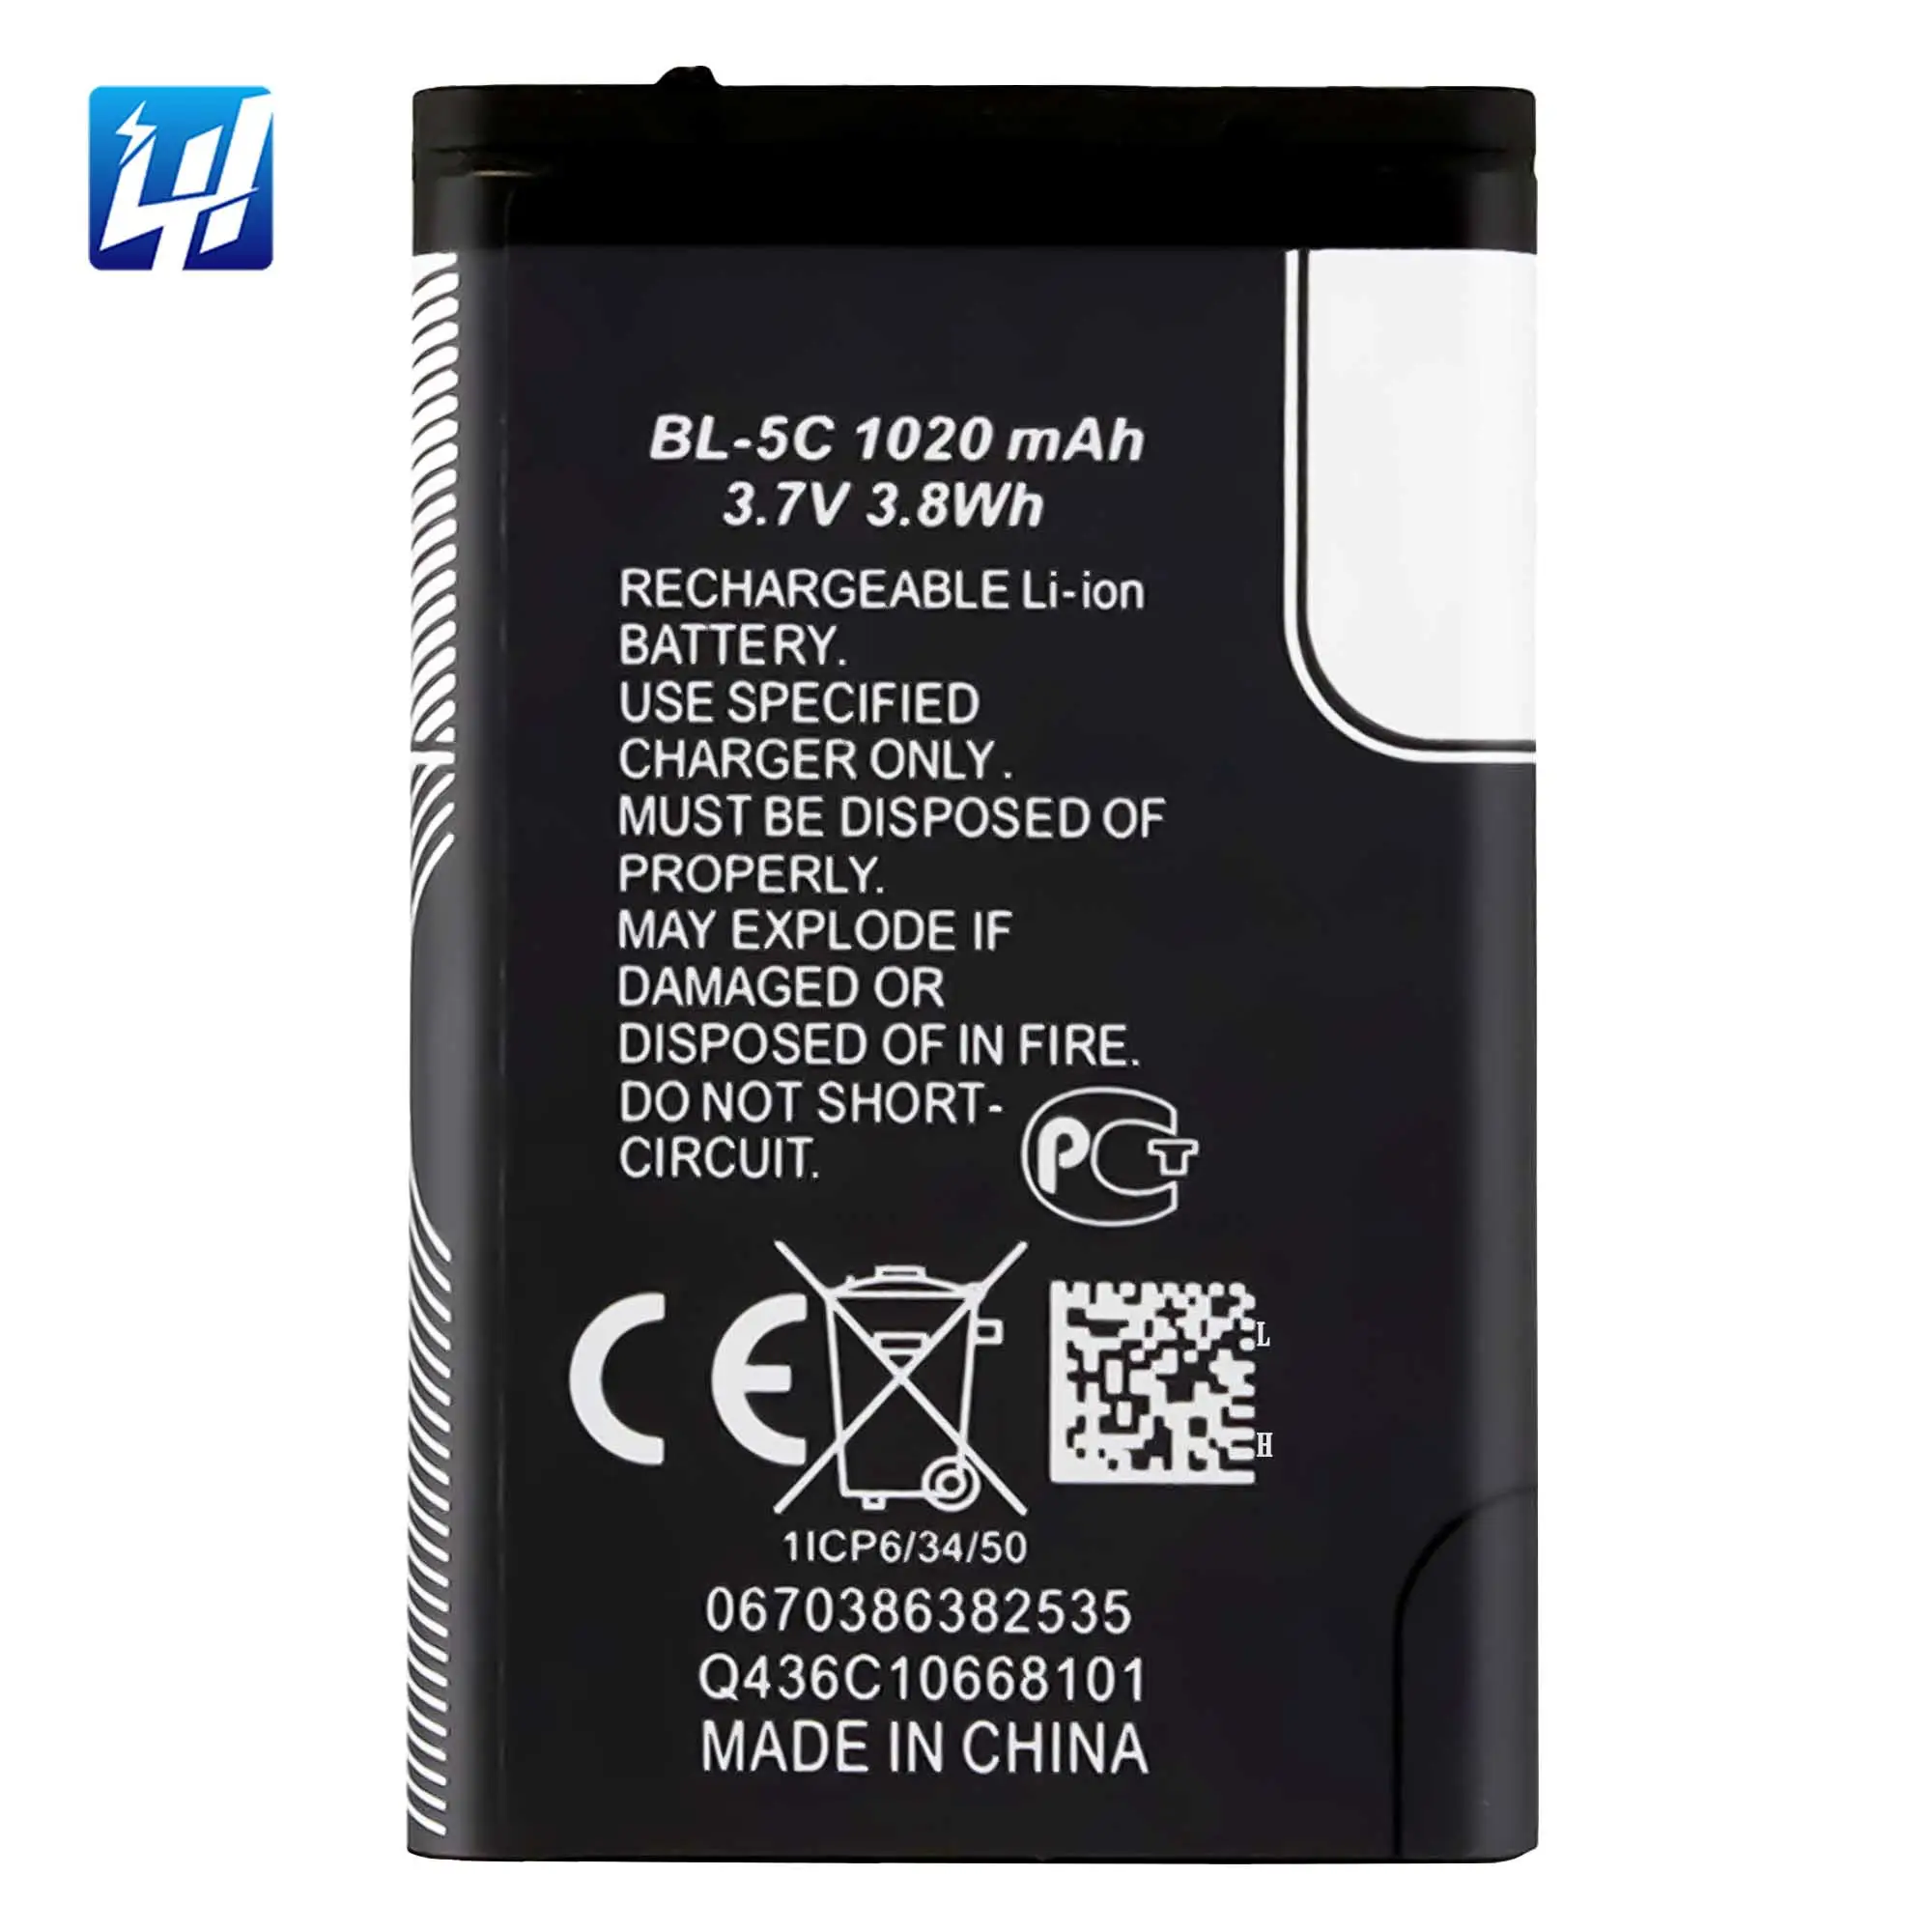 BL-5C 6680 6681 6682 6820 6822 7600 7610 2600 2610 3100 3105 3120 mobile phone battery for Nokia 1100 1112 1208 1600 1680